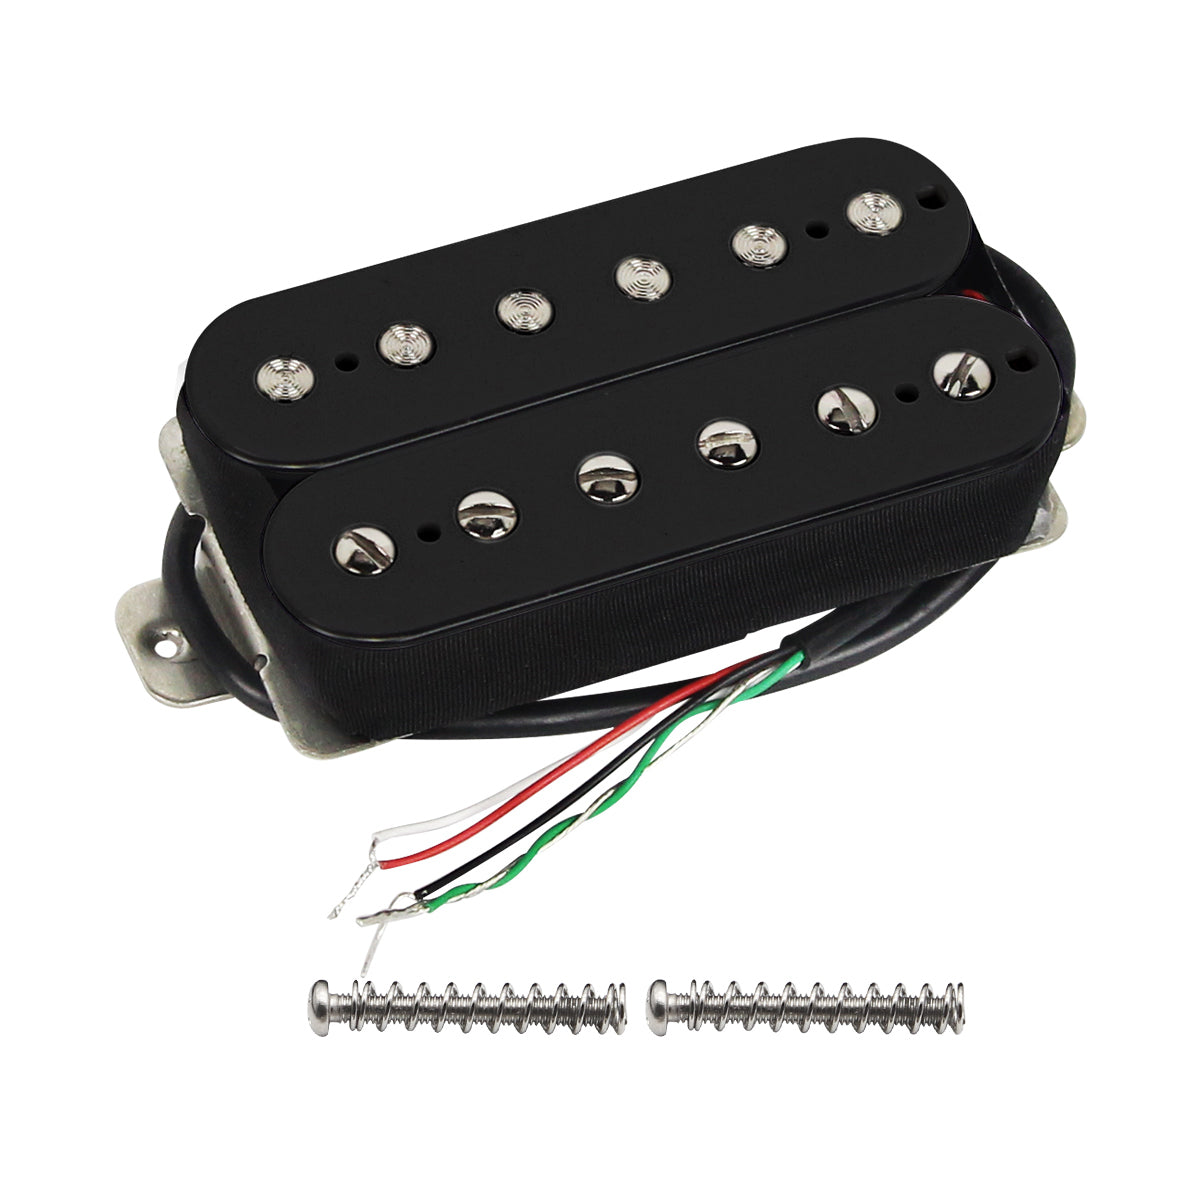 FLEOR Alnico 5 Electric Guitar Double Coil Humbucker Pickups for Electric Guitar Parts,3 Colors Available